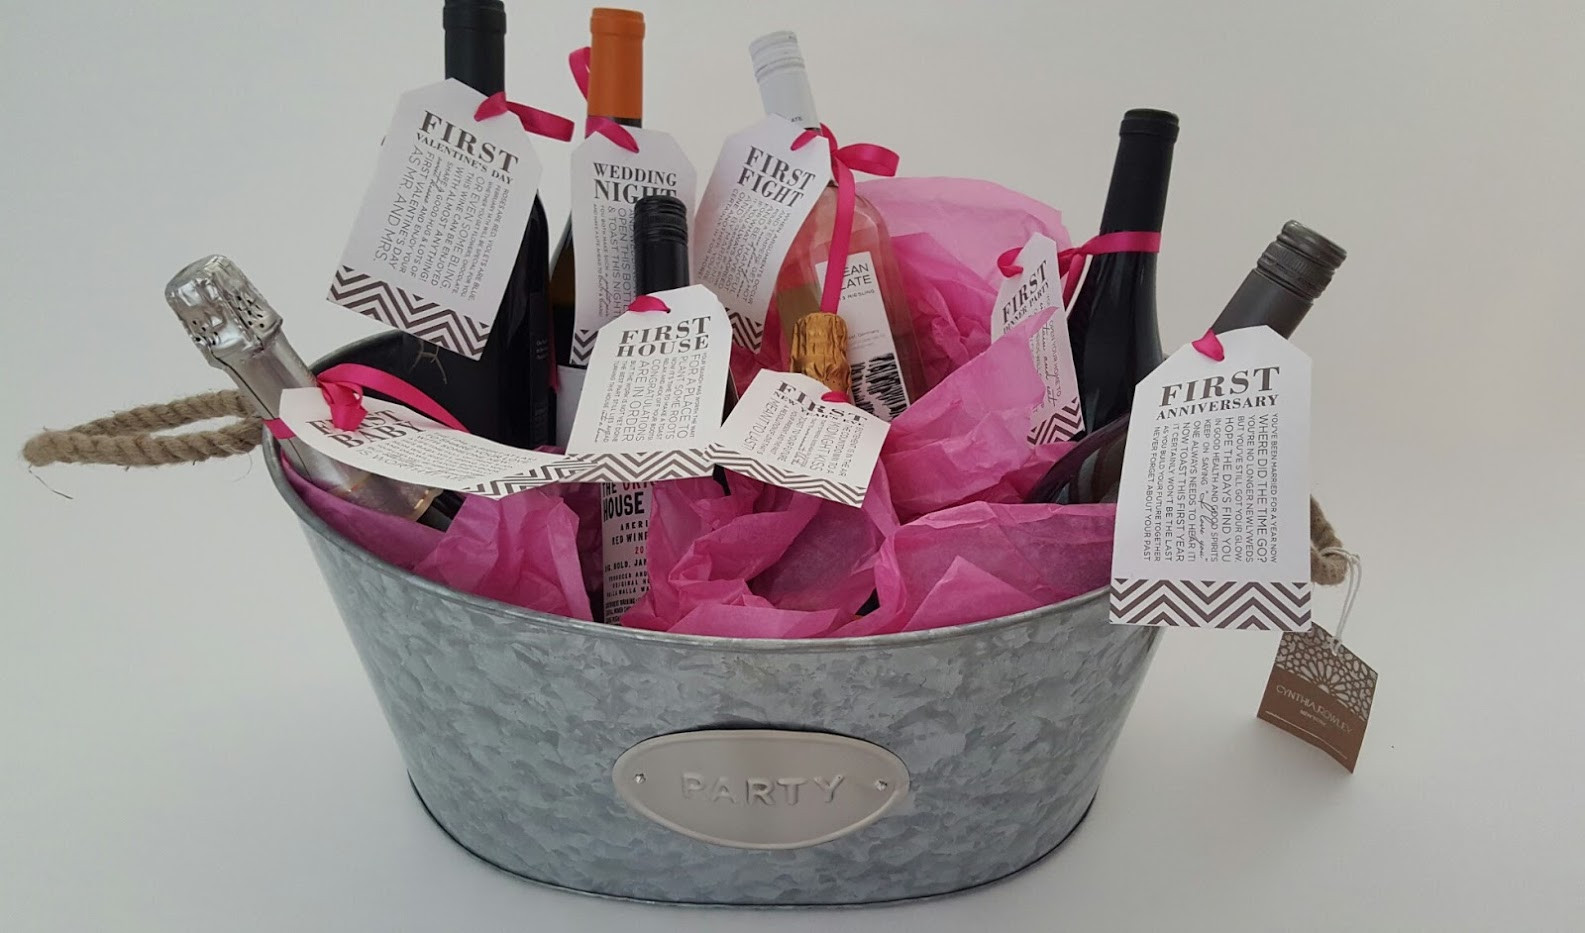 DIY Wedding Gift Ideas For Bride And Groom
 Bridal Shower Gift DIY to Try A Basket of “Firsts” for